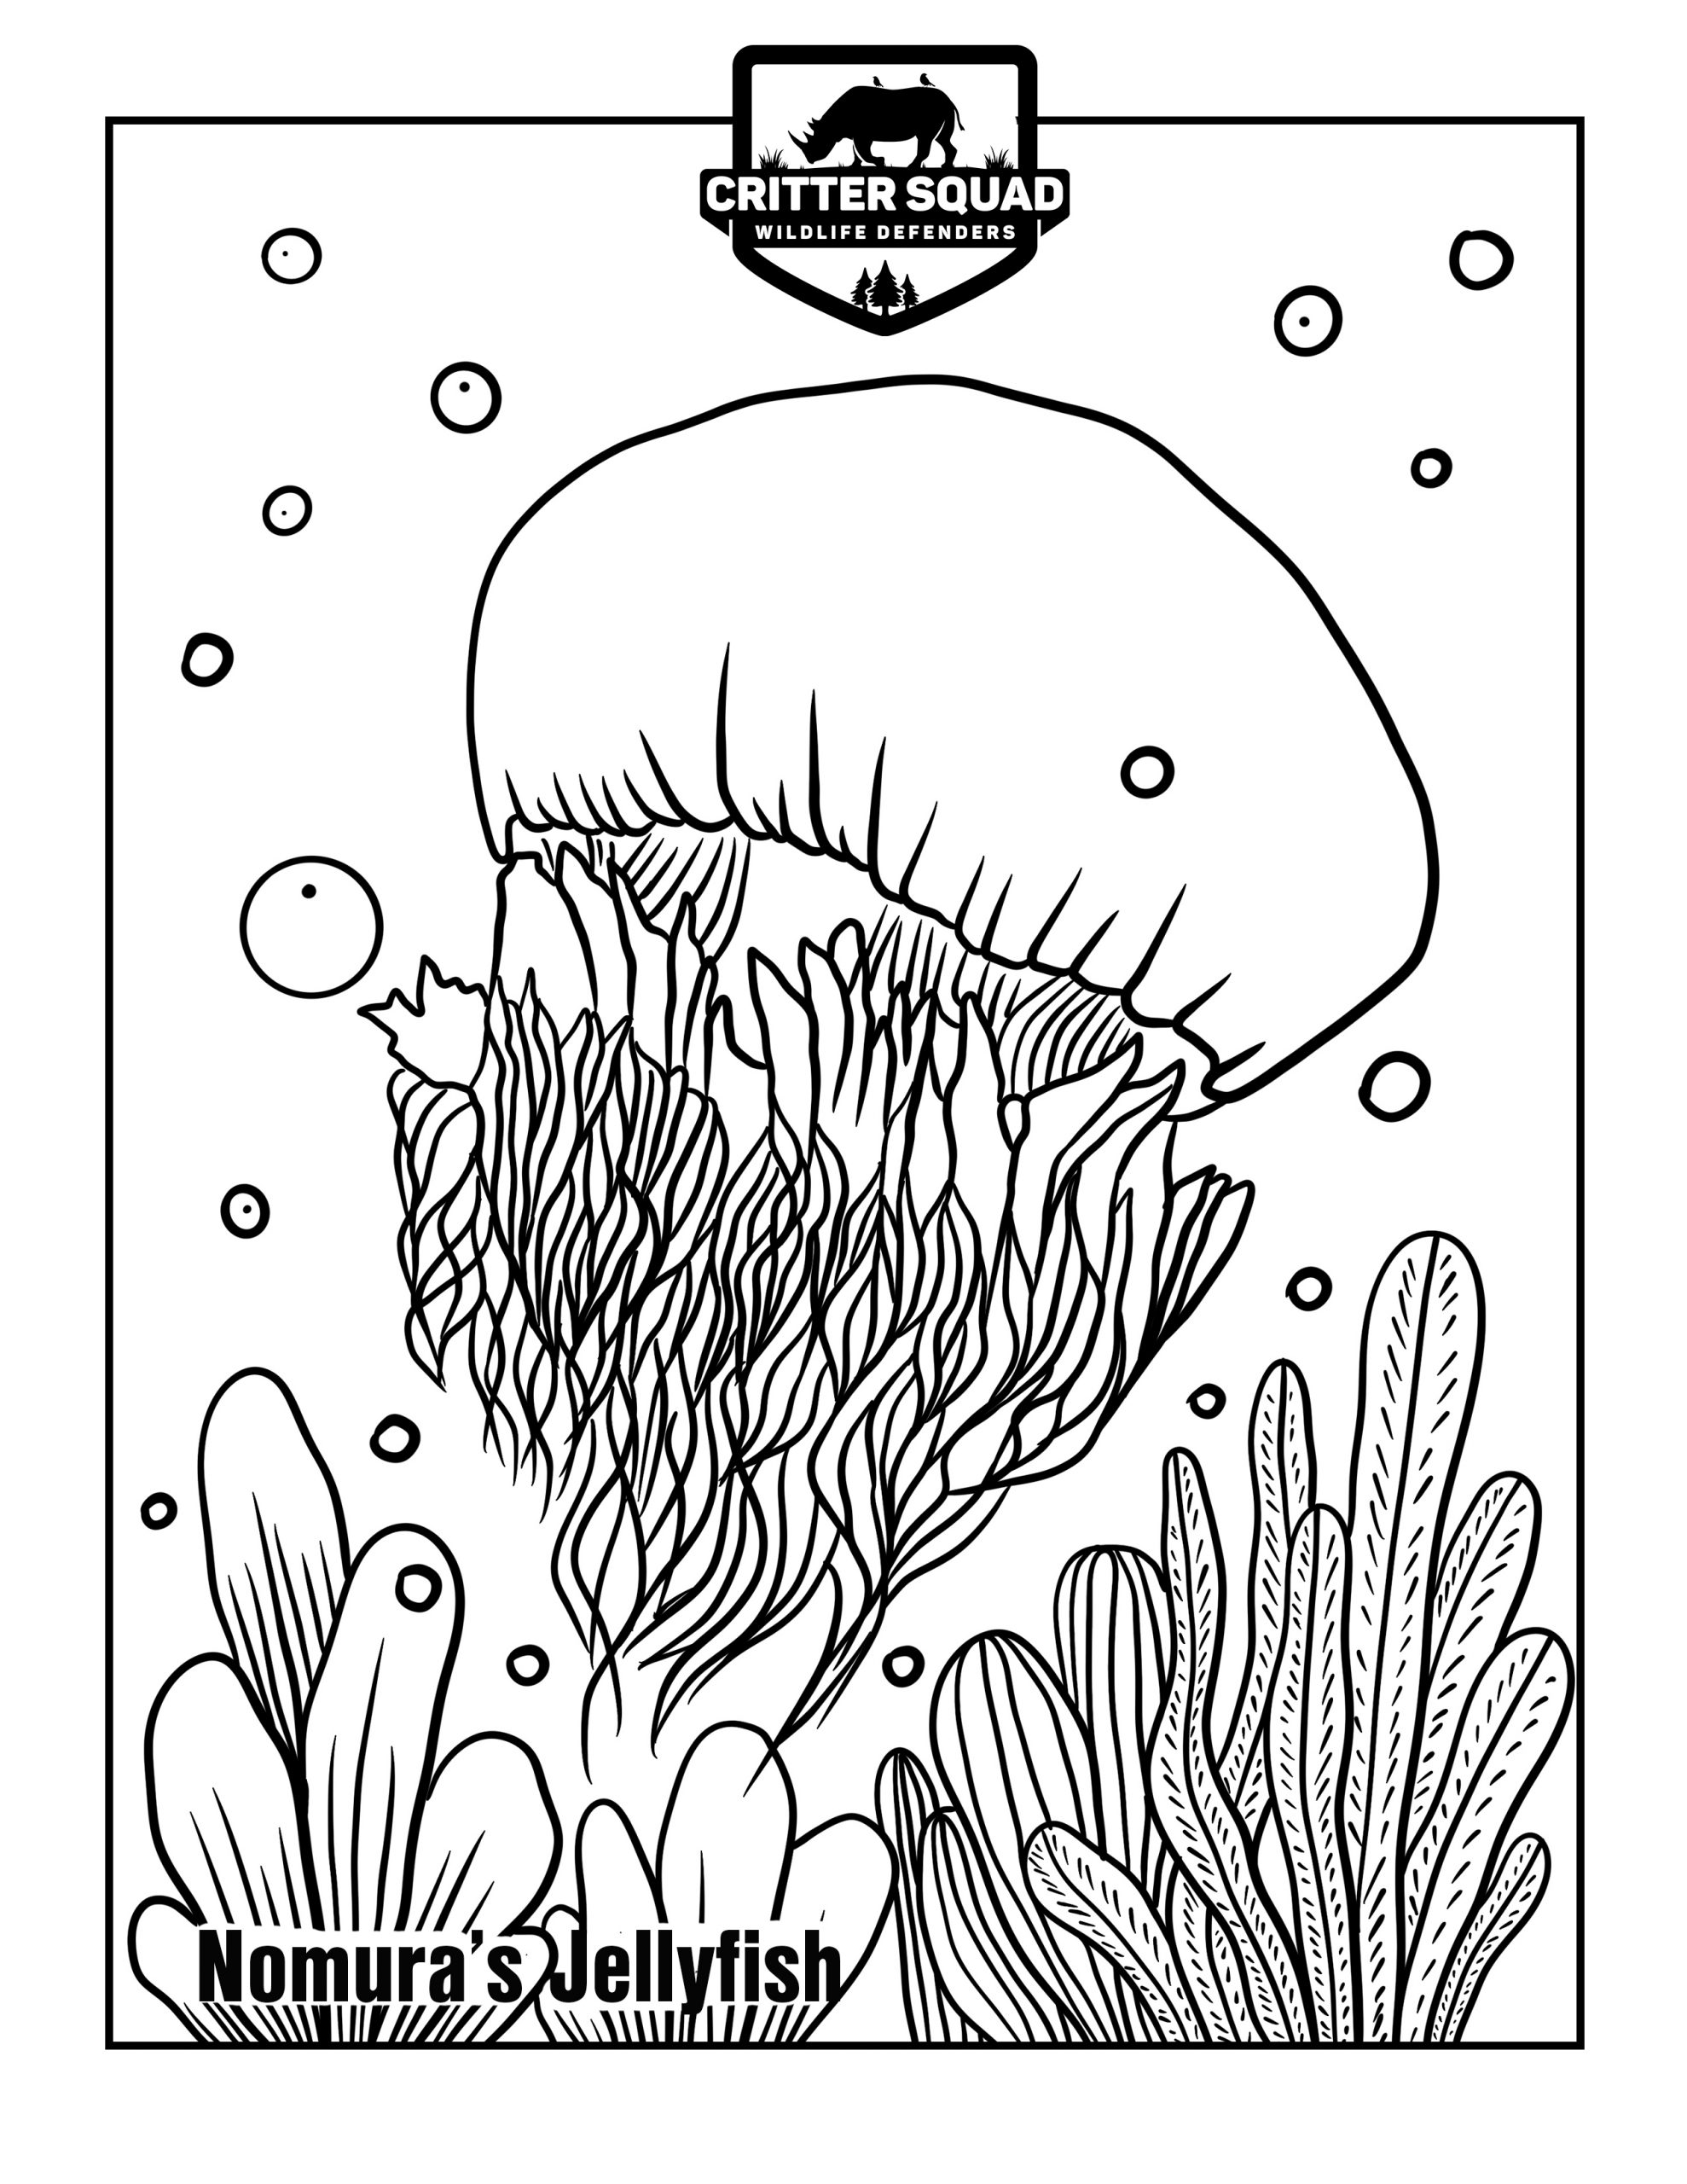 195 Jellyfish Coloring Page Designs: Underwater Beauty in Color 189